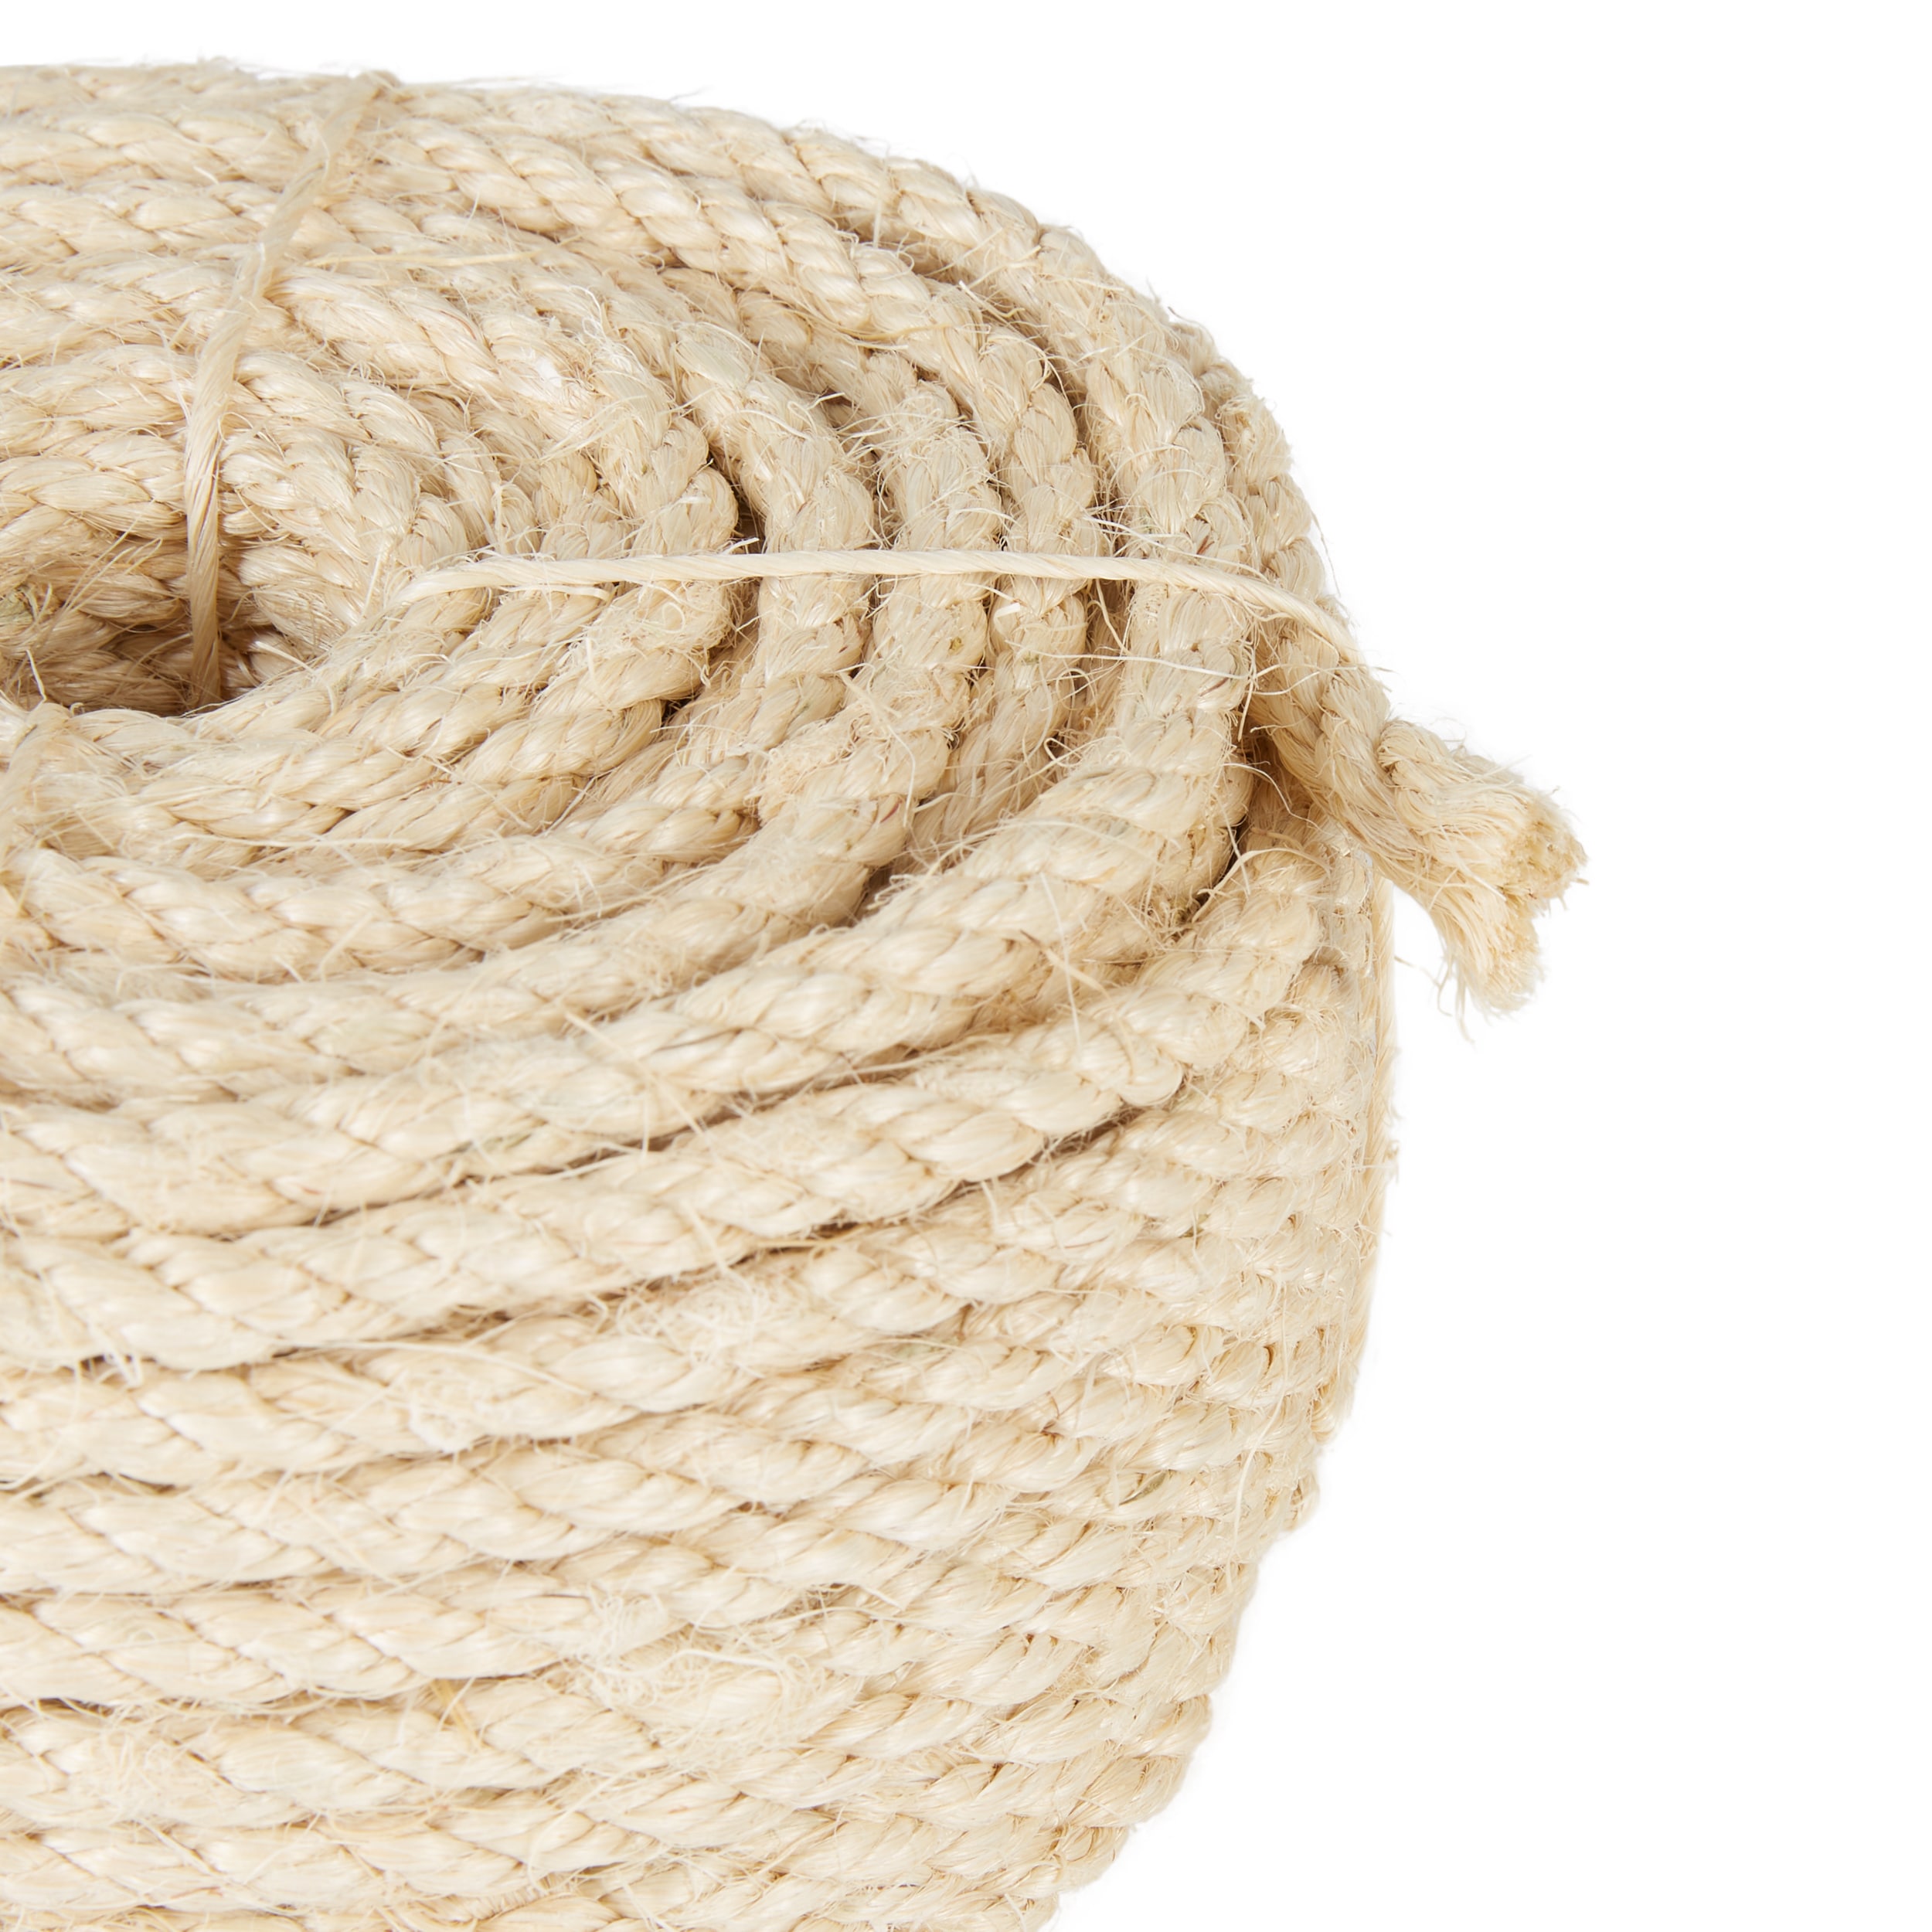 T.W. Evans Cordage 0.375-in x 100-ft Twisted Sisal Rope (By-the